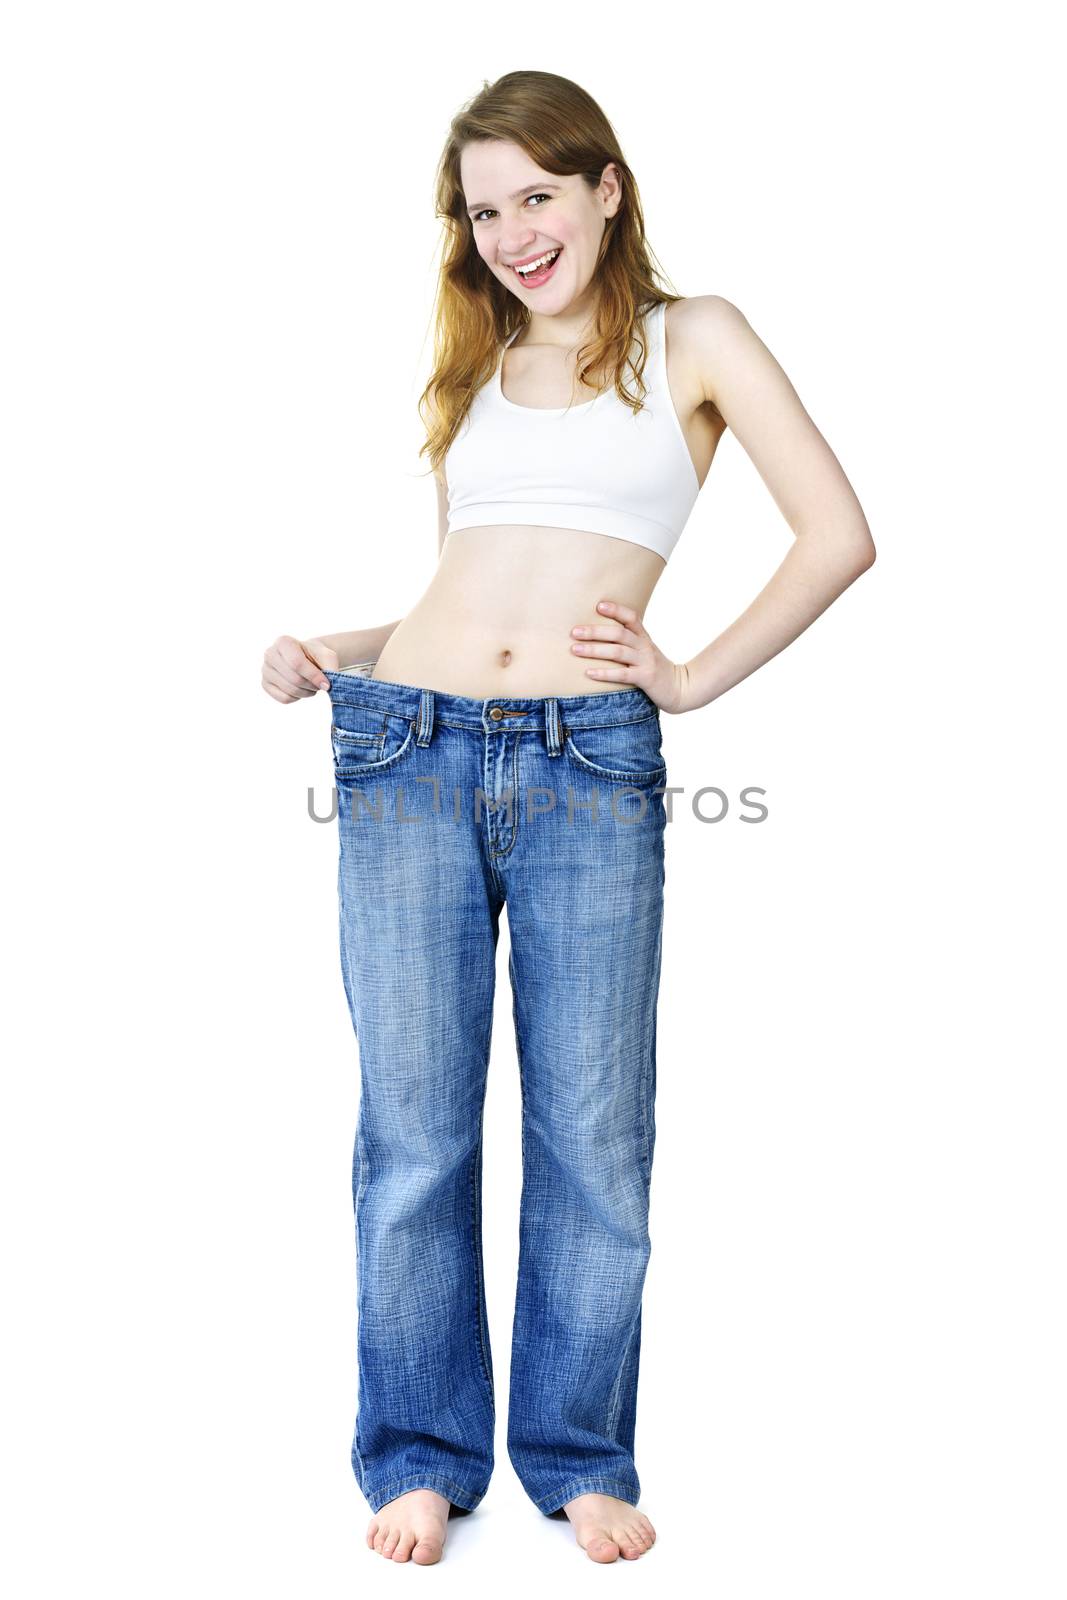 Happy girl in jeans after losing weight by elenathewise